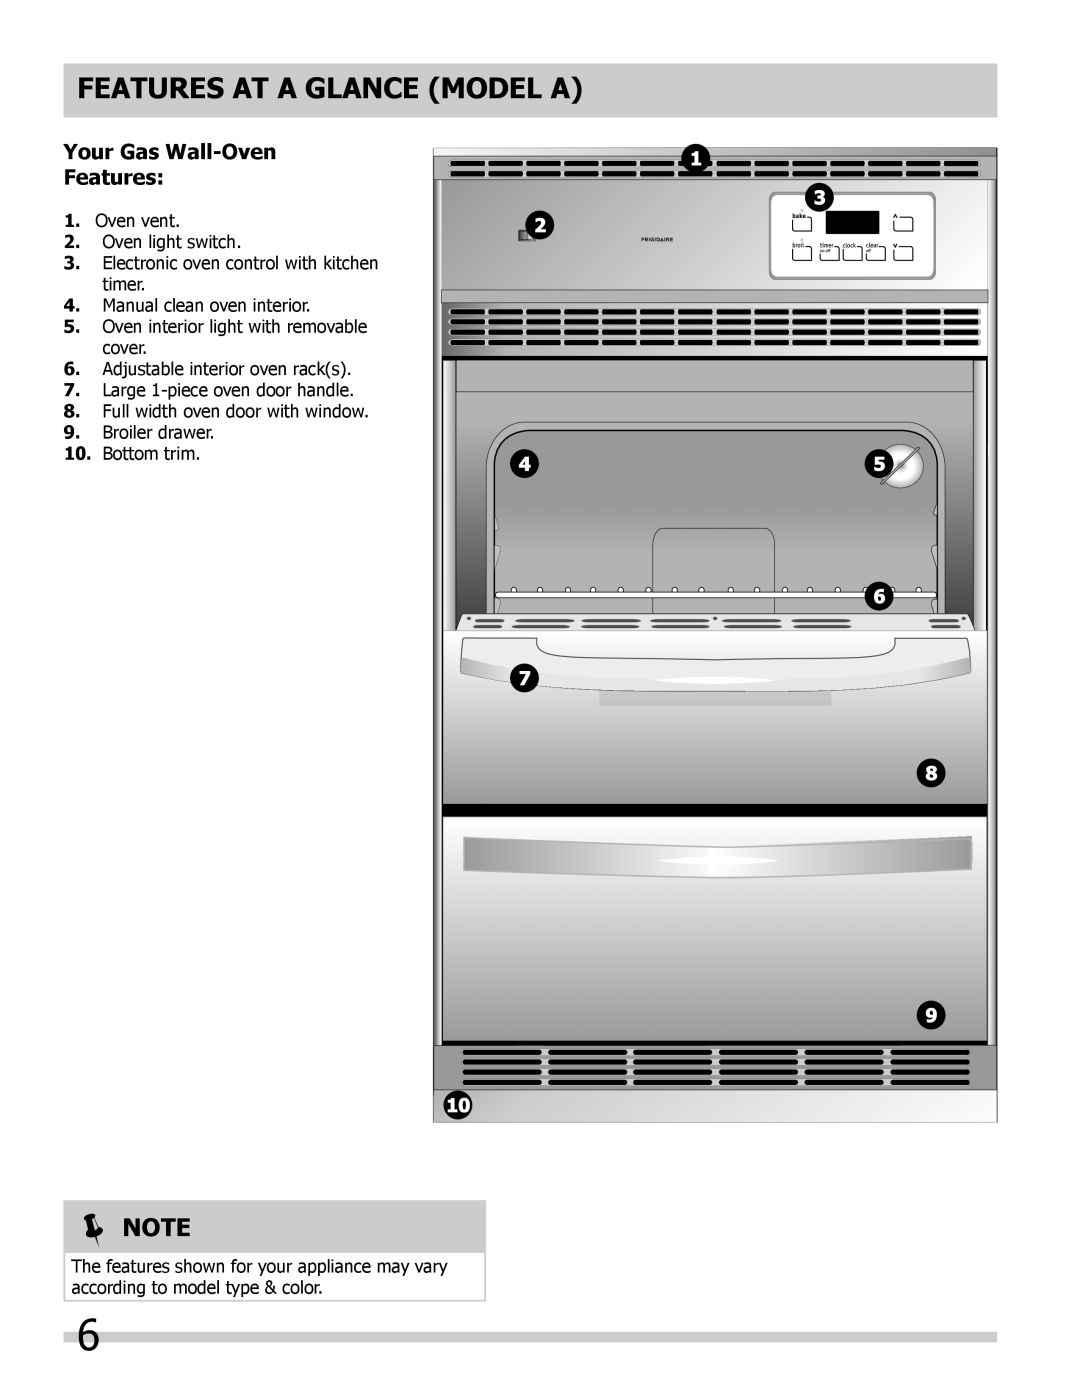 Frigidaire 318200964 important safety instructions FEATURES AT A GLANCE model A, Your Gas Wall-Oven Features,  Note 